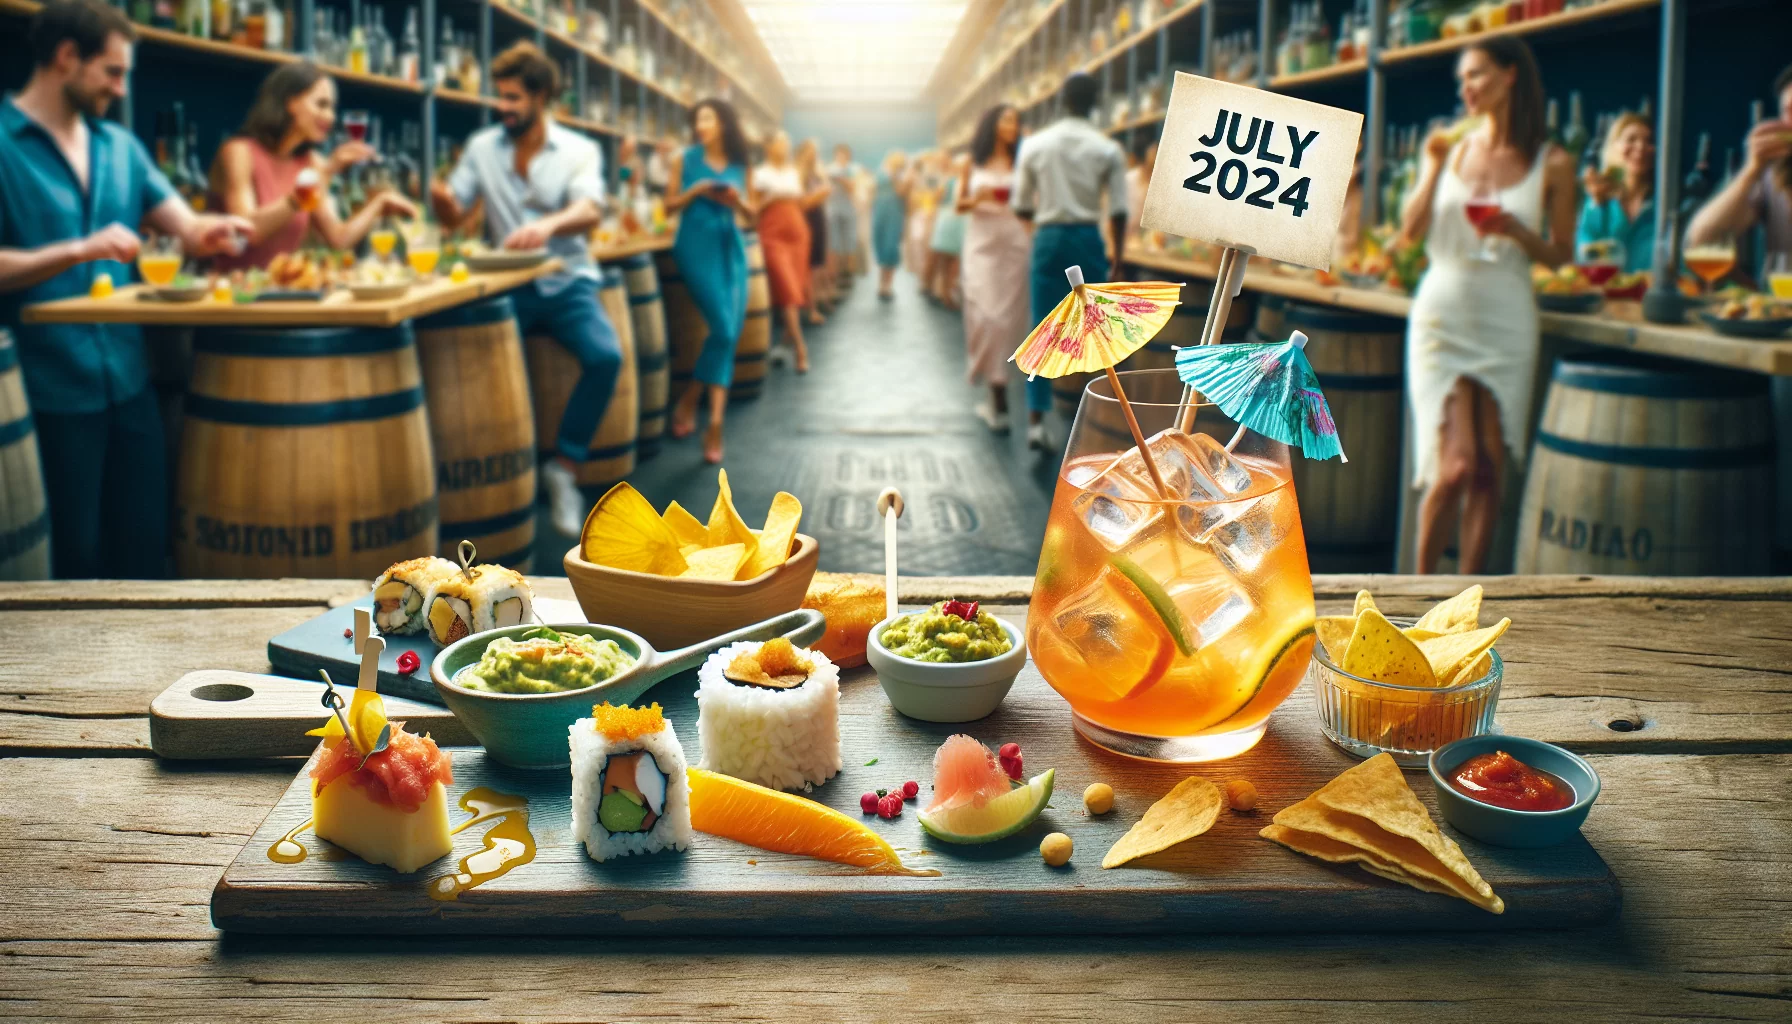 Exploring July 2024's gastronomic trends: from refreshing summer drinks to international snacks